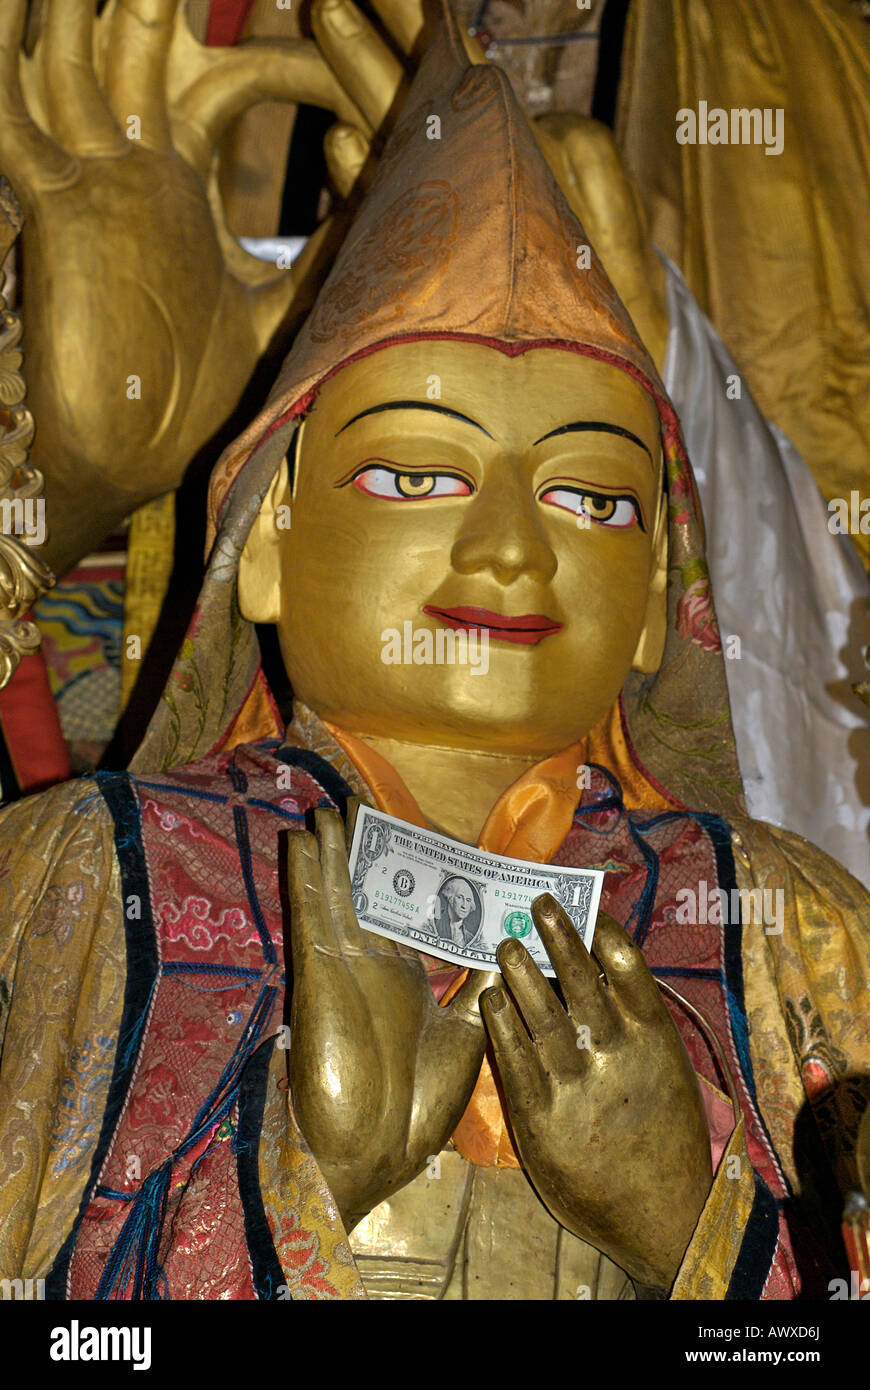 Dollar banknote in the hands of a buddhist statue of a previous Dalai Lama, Drepung, monastery, Lhasa, Tibet Stock Photo